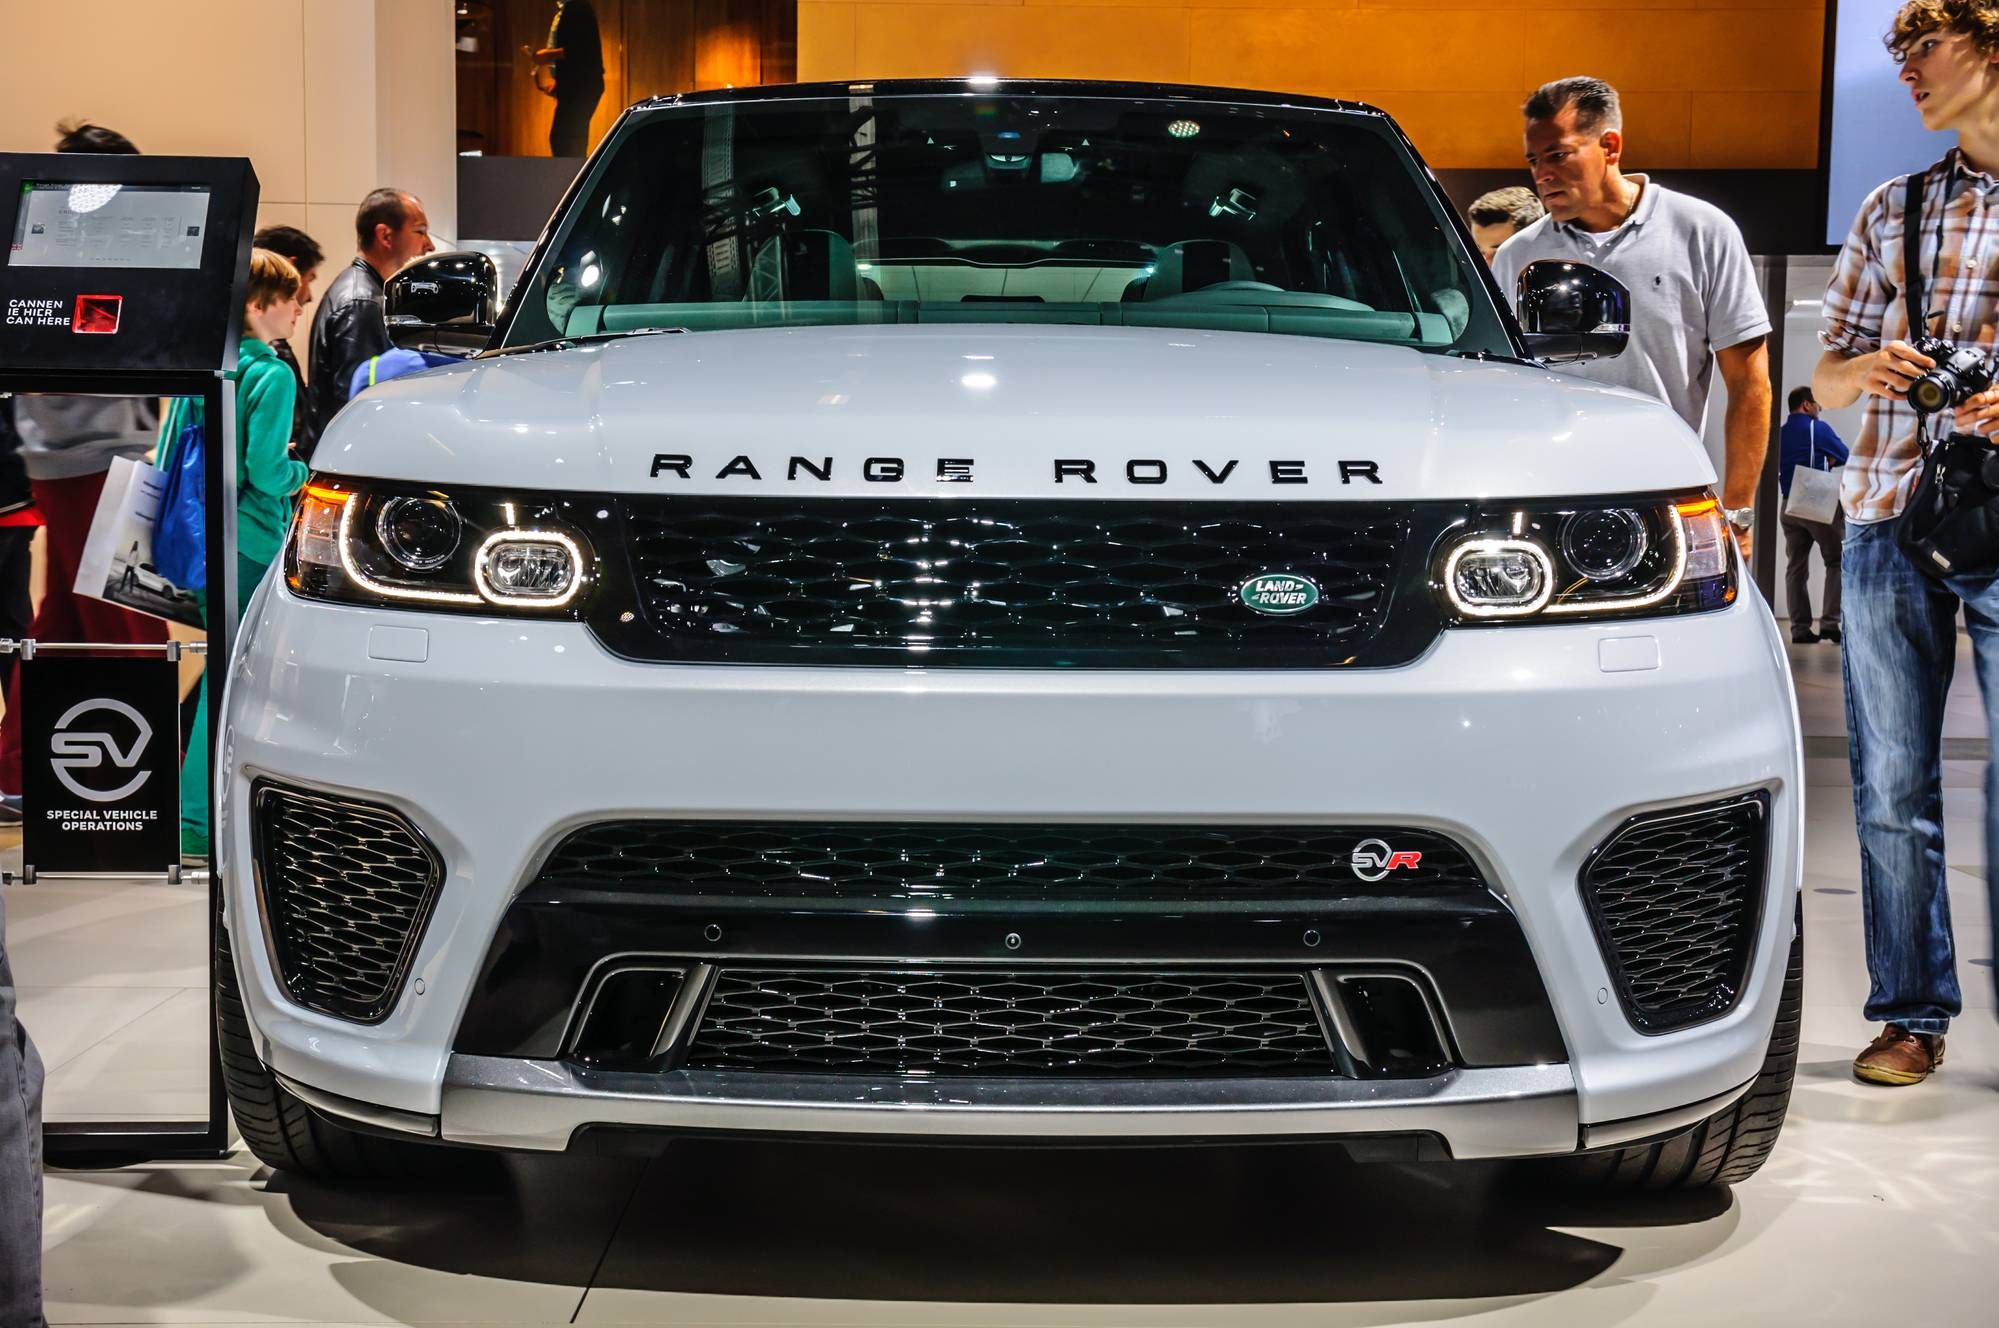 A Range Rover defect class action lawsuit claims that the luxury SUVs can lose power.